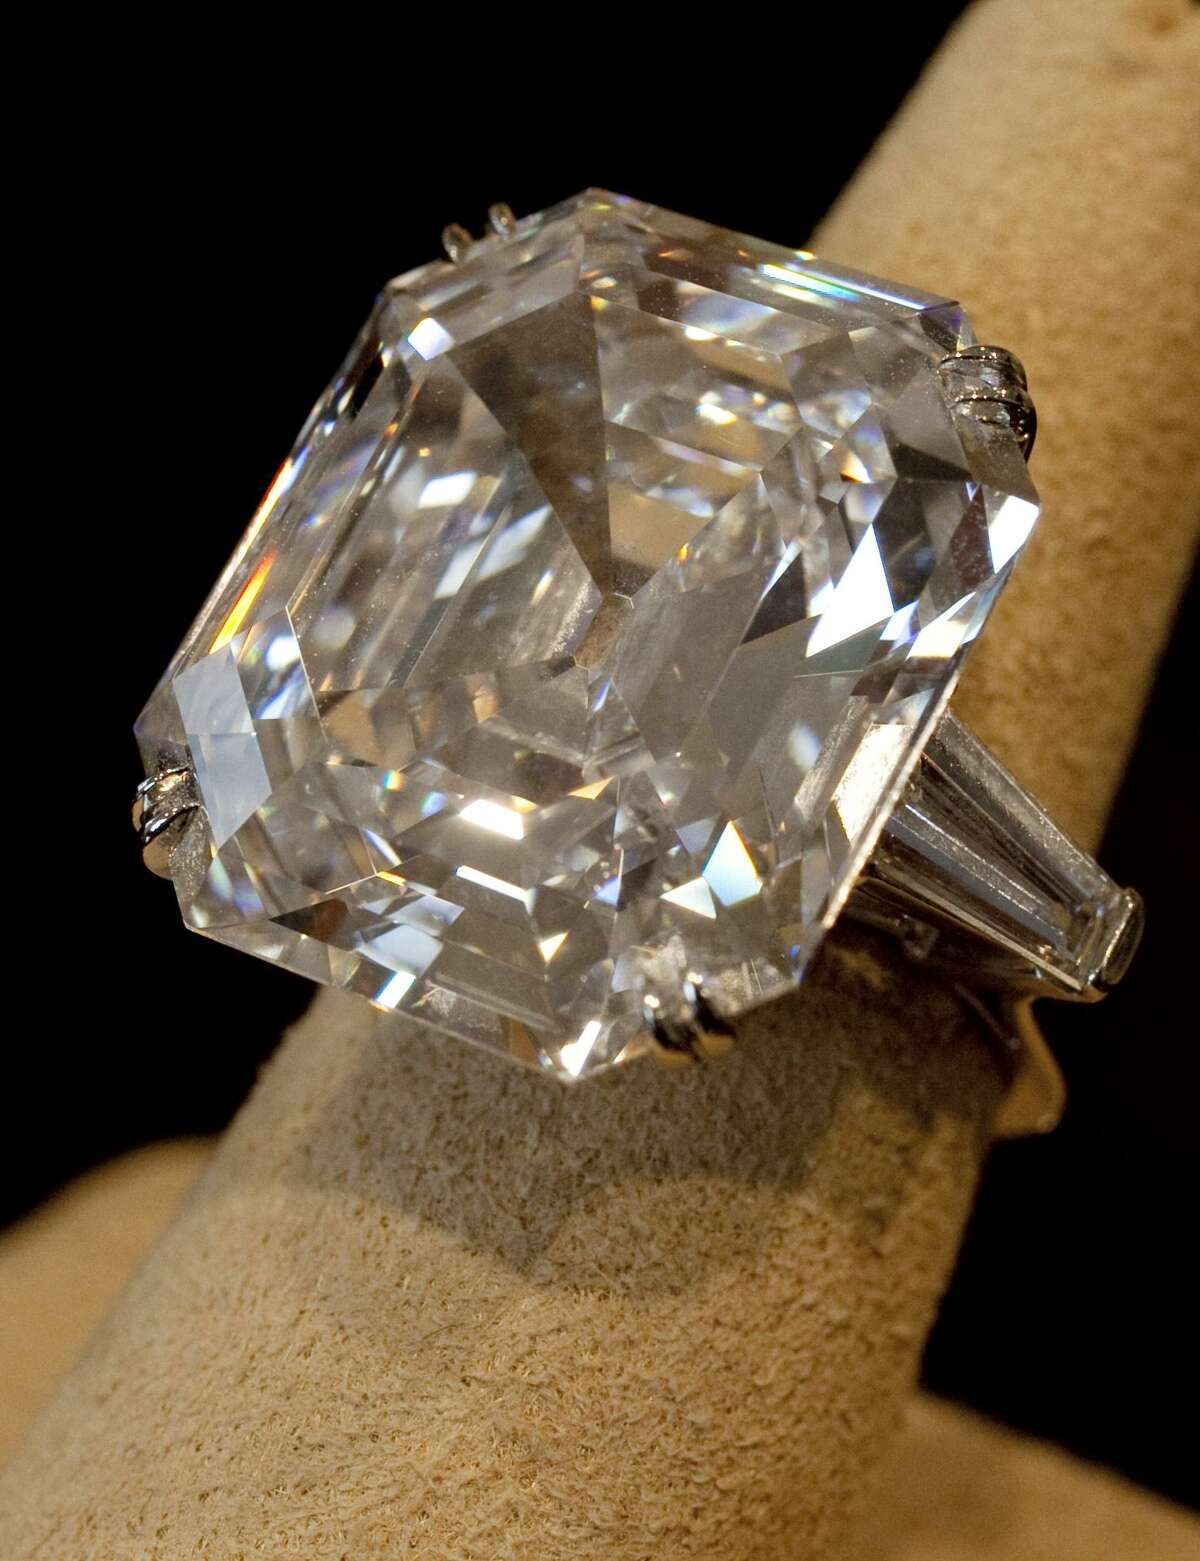 This Sept. 1, 2011, file photo shows "The Elizabeth Taylor Diamond," a 33.19 carat a gift to the actress from Richard Burton at Christie's, in New York. The ring given to Elizabeth Taylor by actor Richard Burton sold for over $8.8 million at auction in New York Tuesday. (AP Photo/Richard Drew, File)